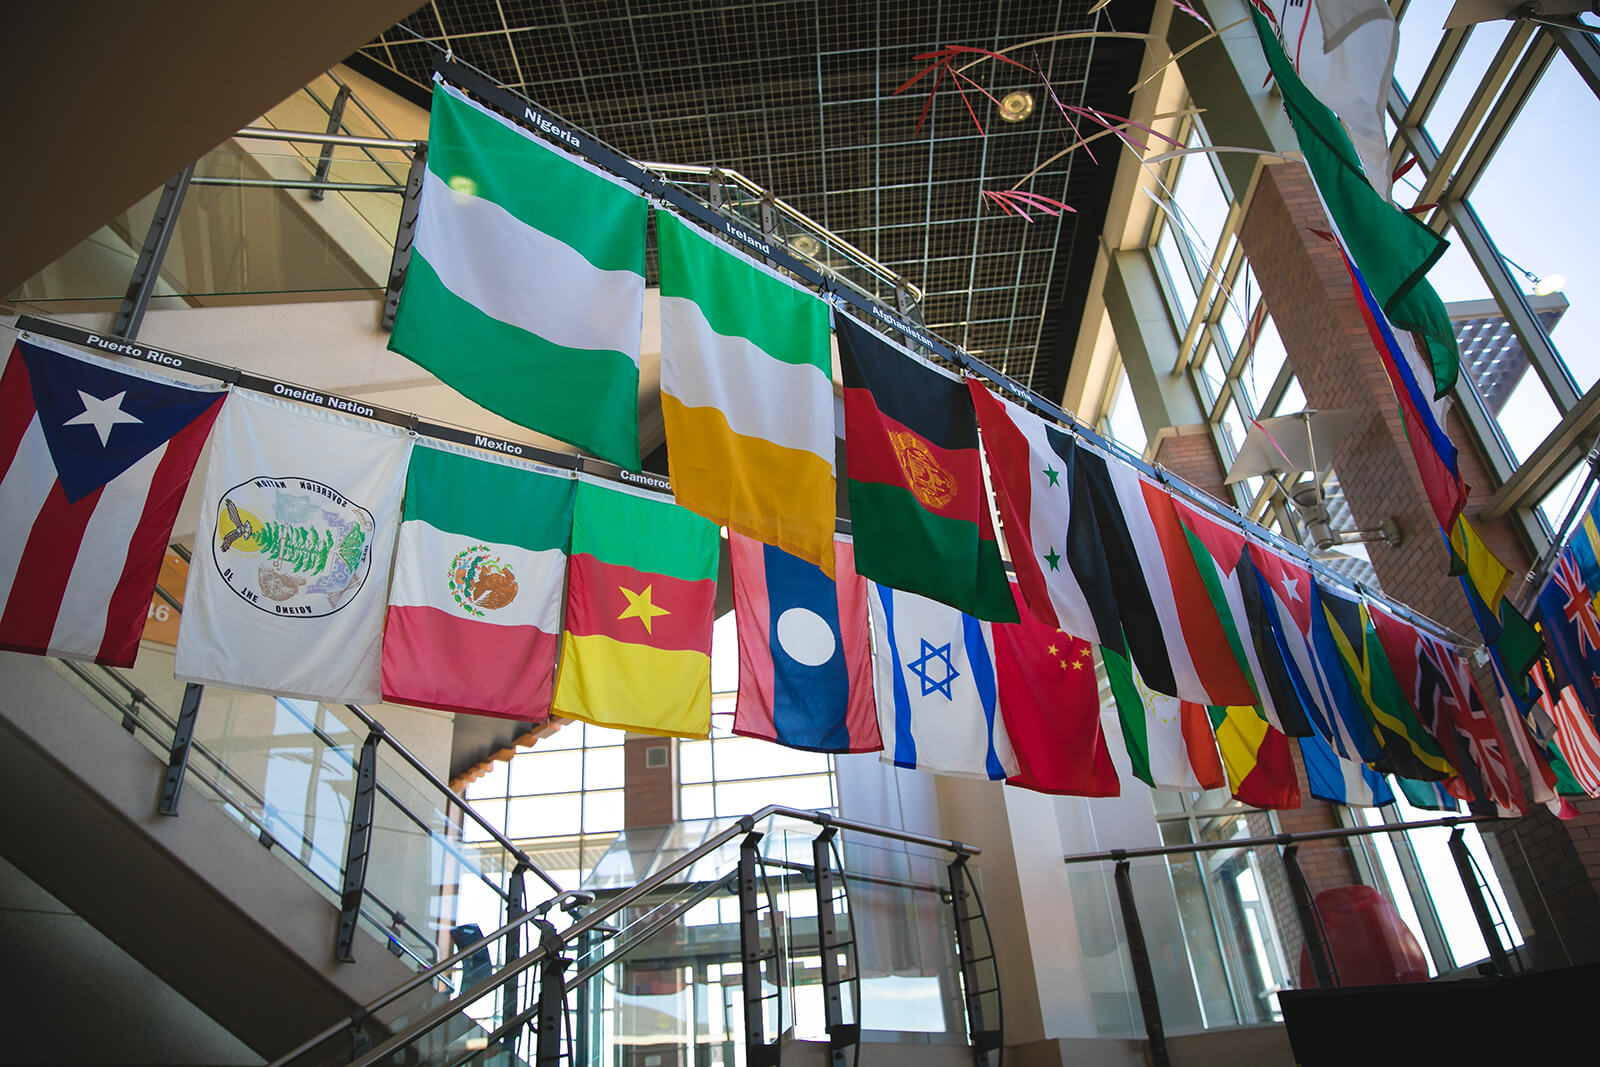 International flags on display in the Green Bay Campus lobby